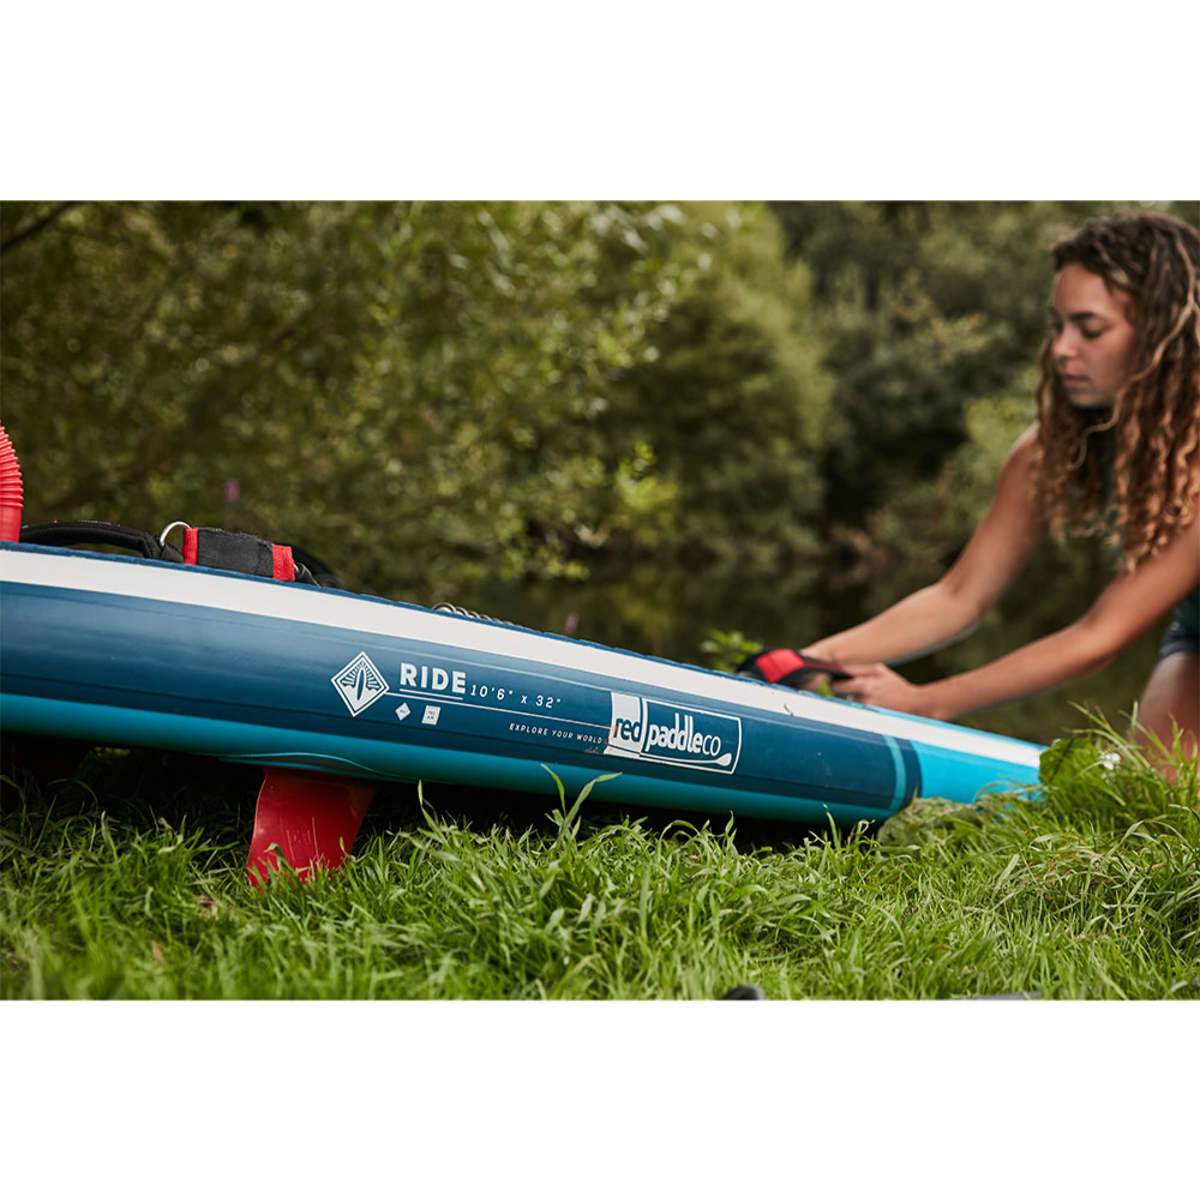 
                  
                    Red Paddle Co. 10'6 Ride Full Package Blue 2022 - FREE Shipping 🛻
                  
                